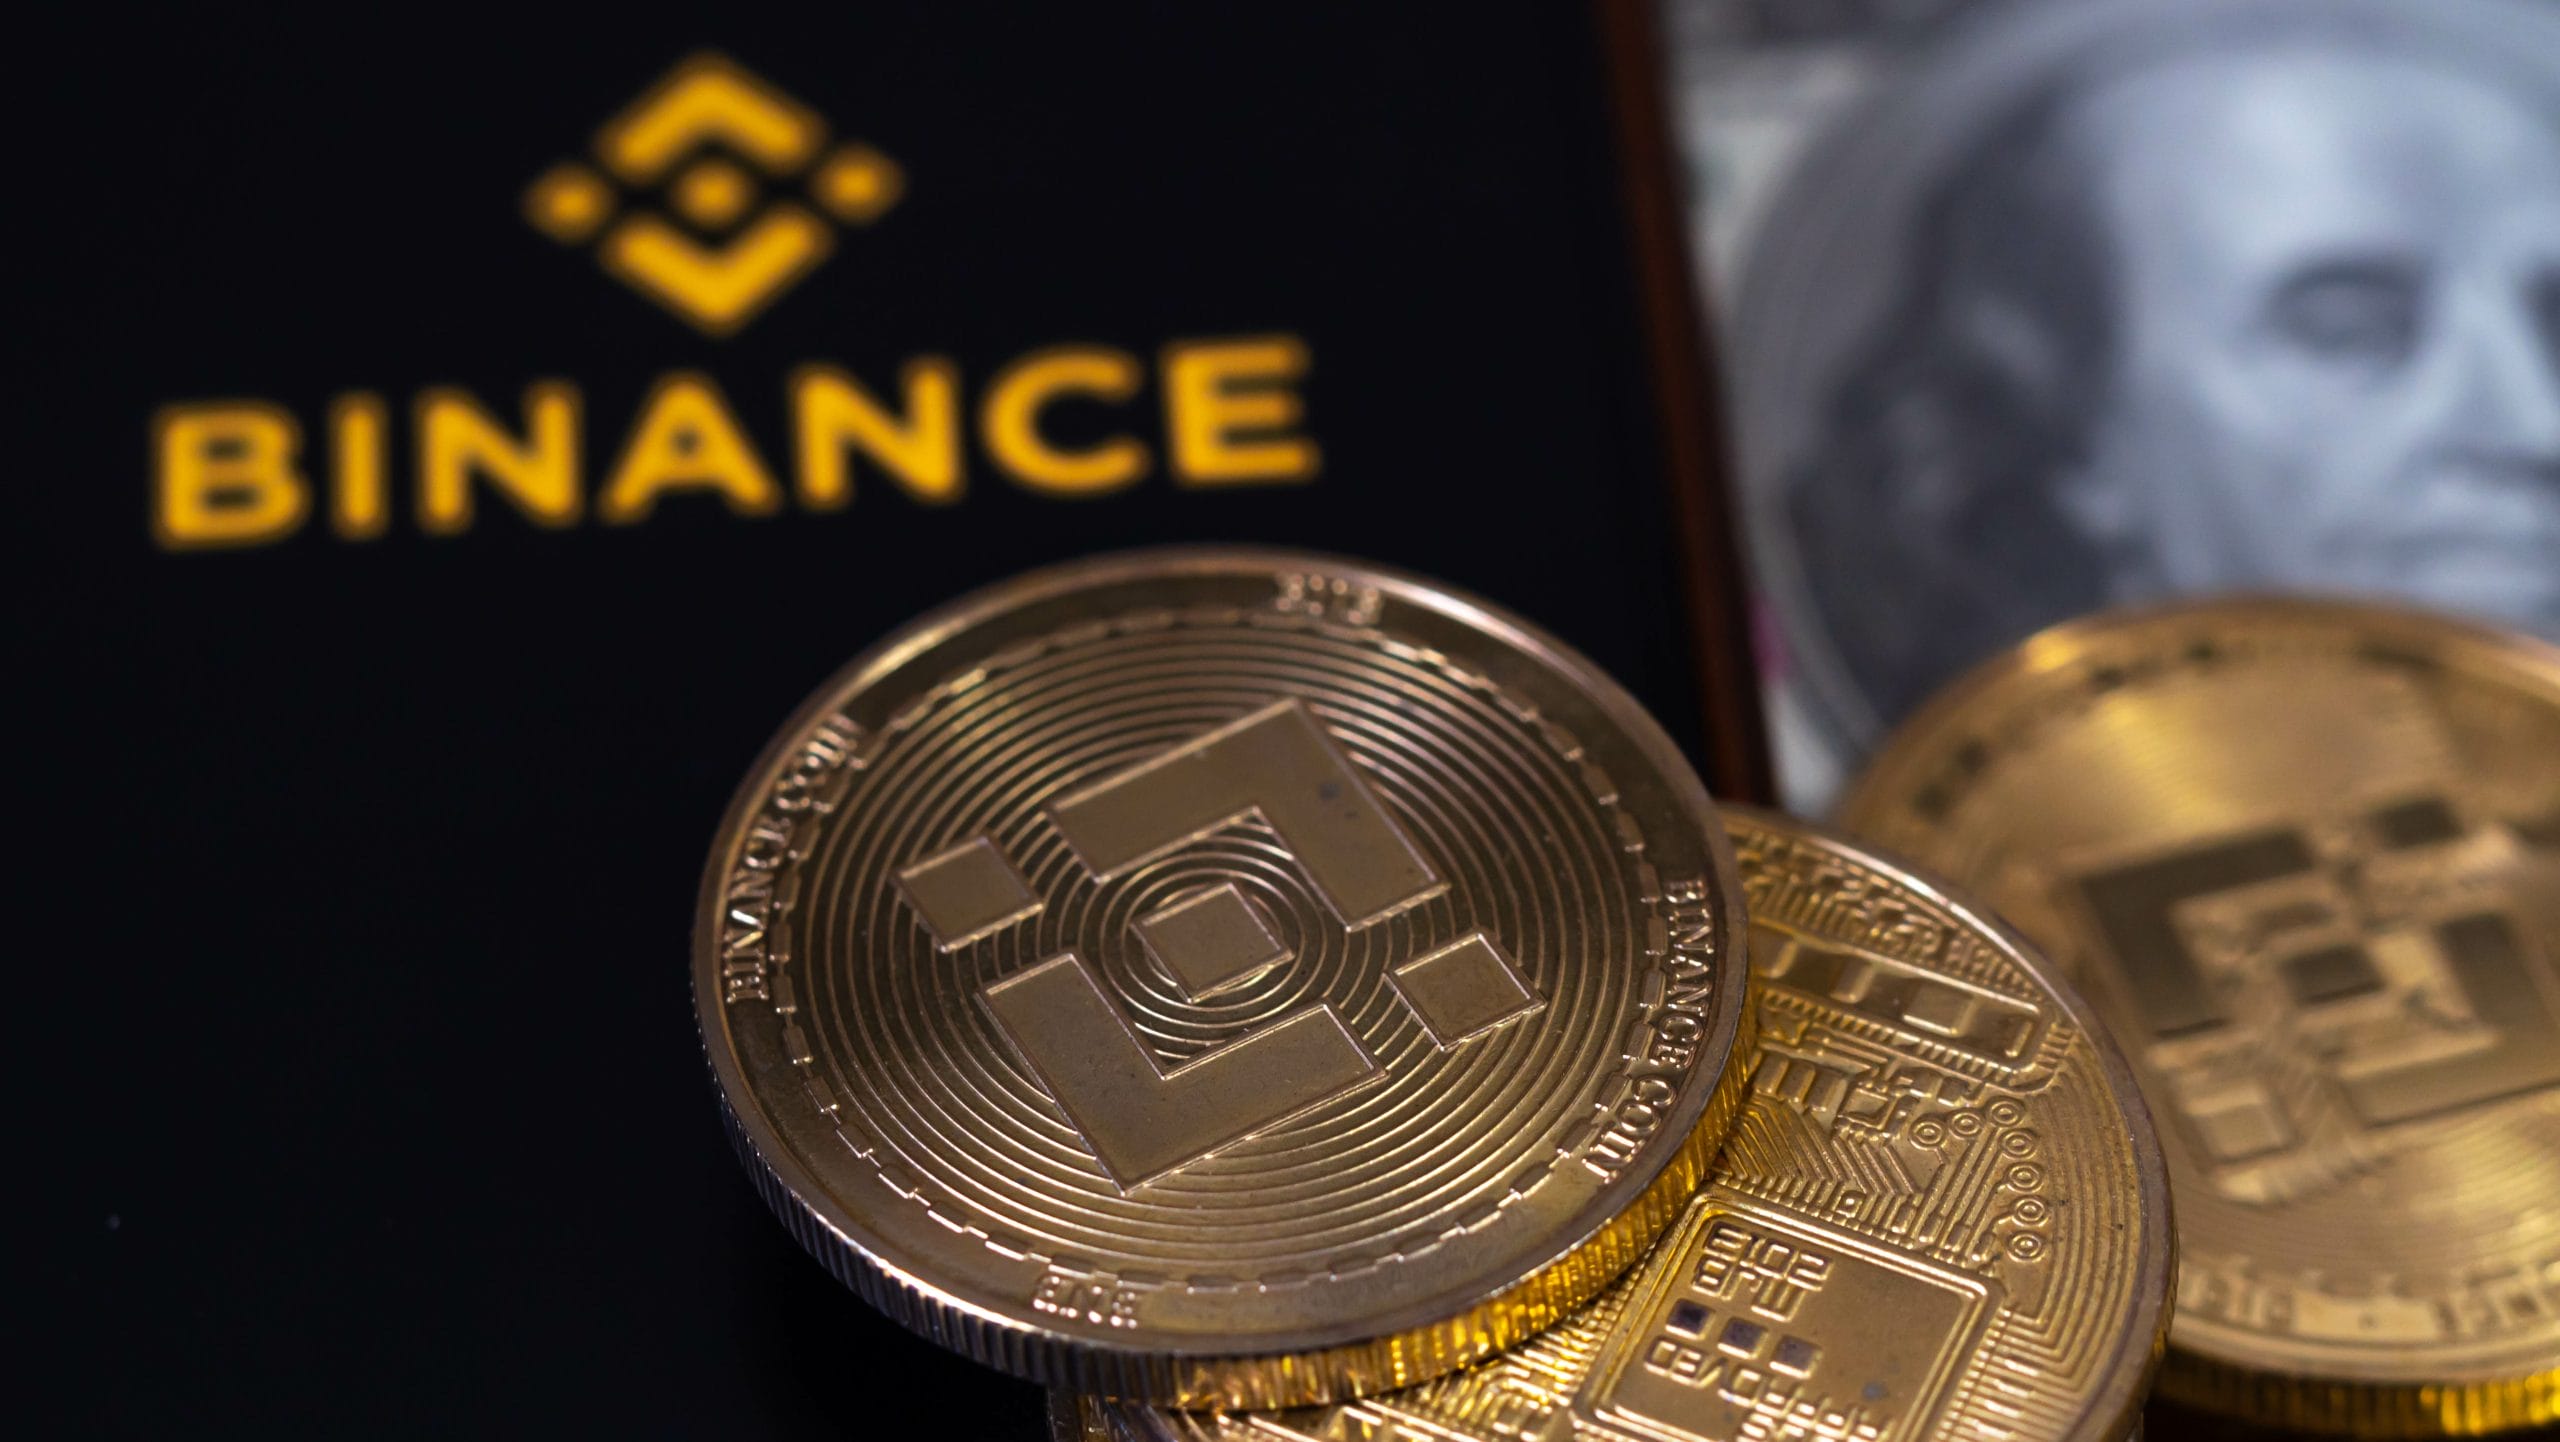 Binance to Delist Multiple TrueUSD Trading Pairs – What’s Going On?